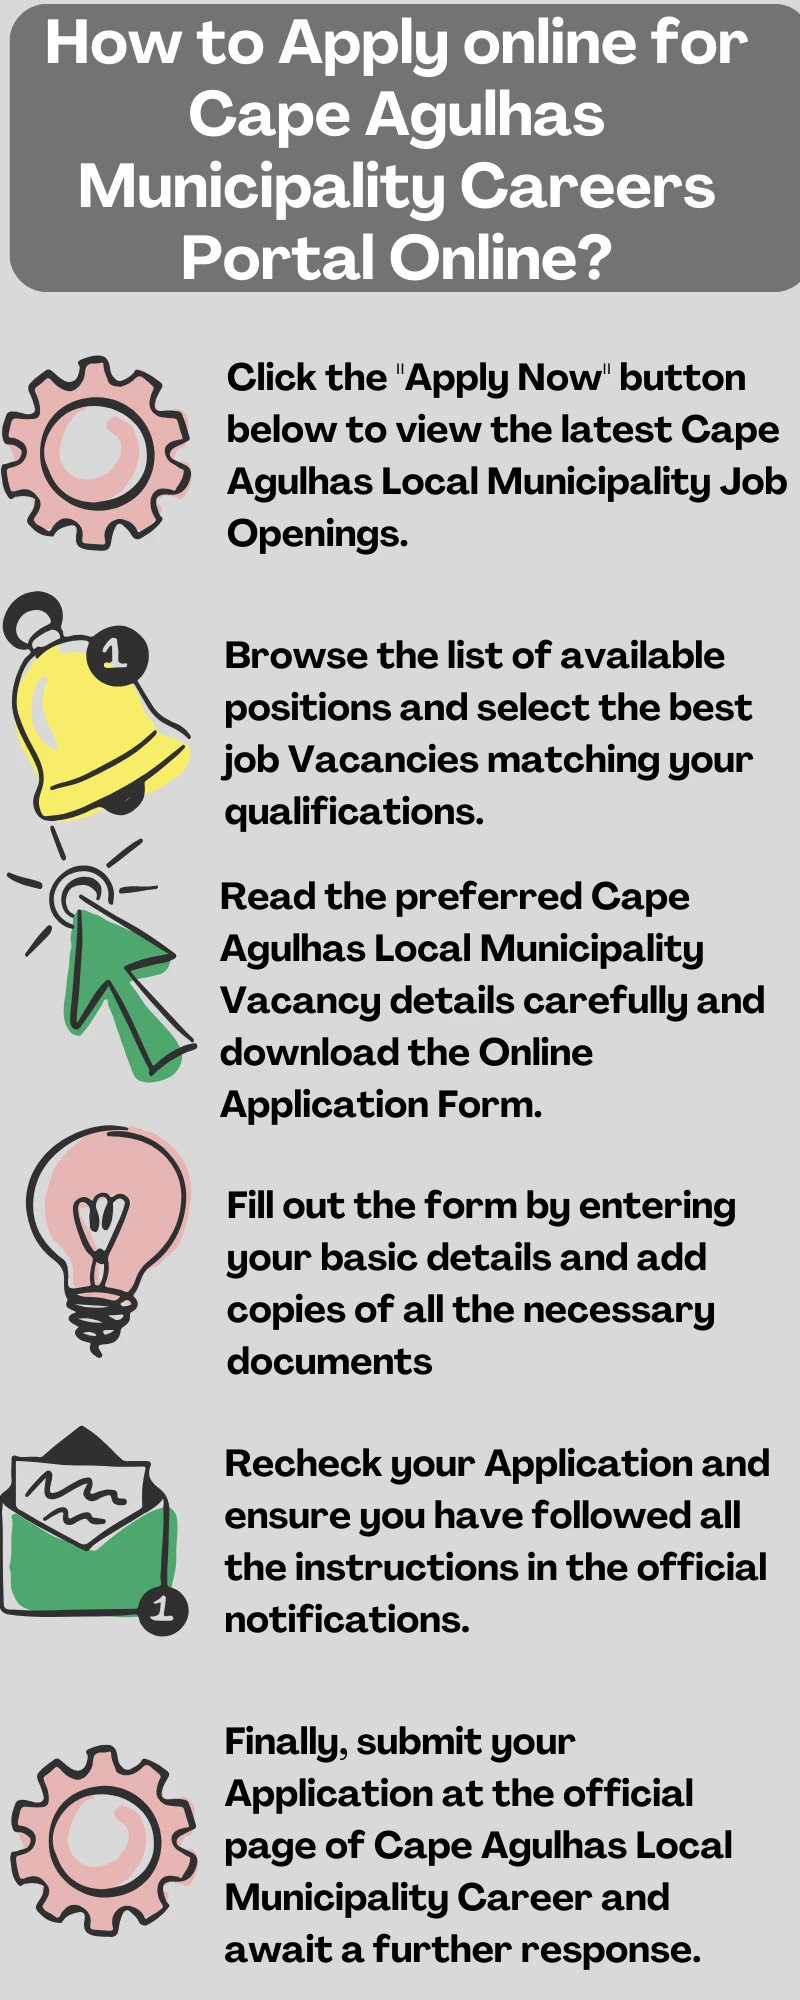 How to Apply online for Cape Agulhas Municipality Careers Portal Online?